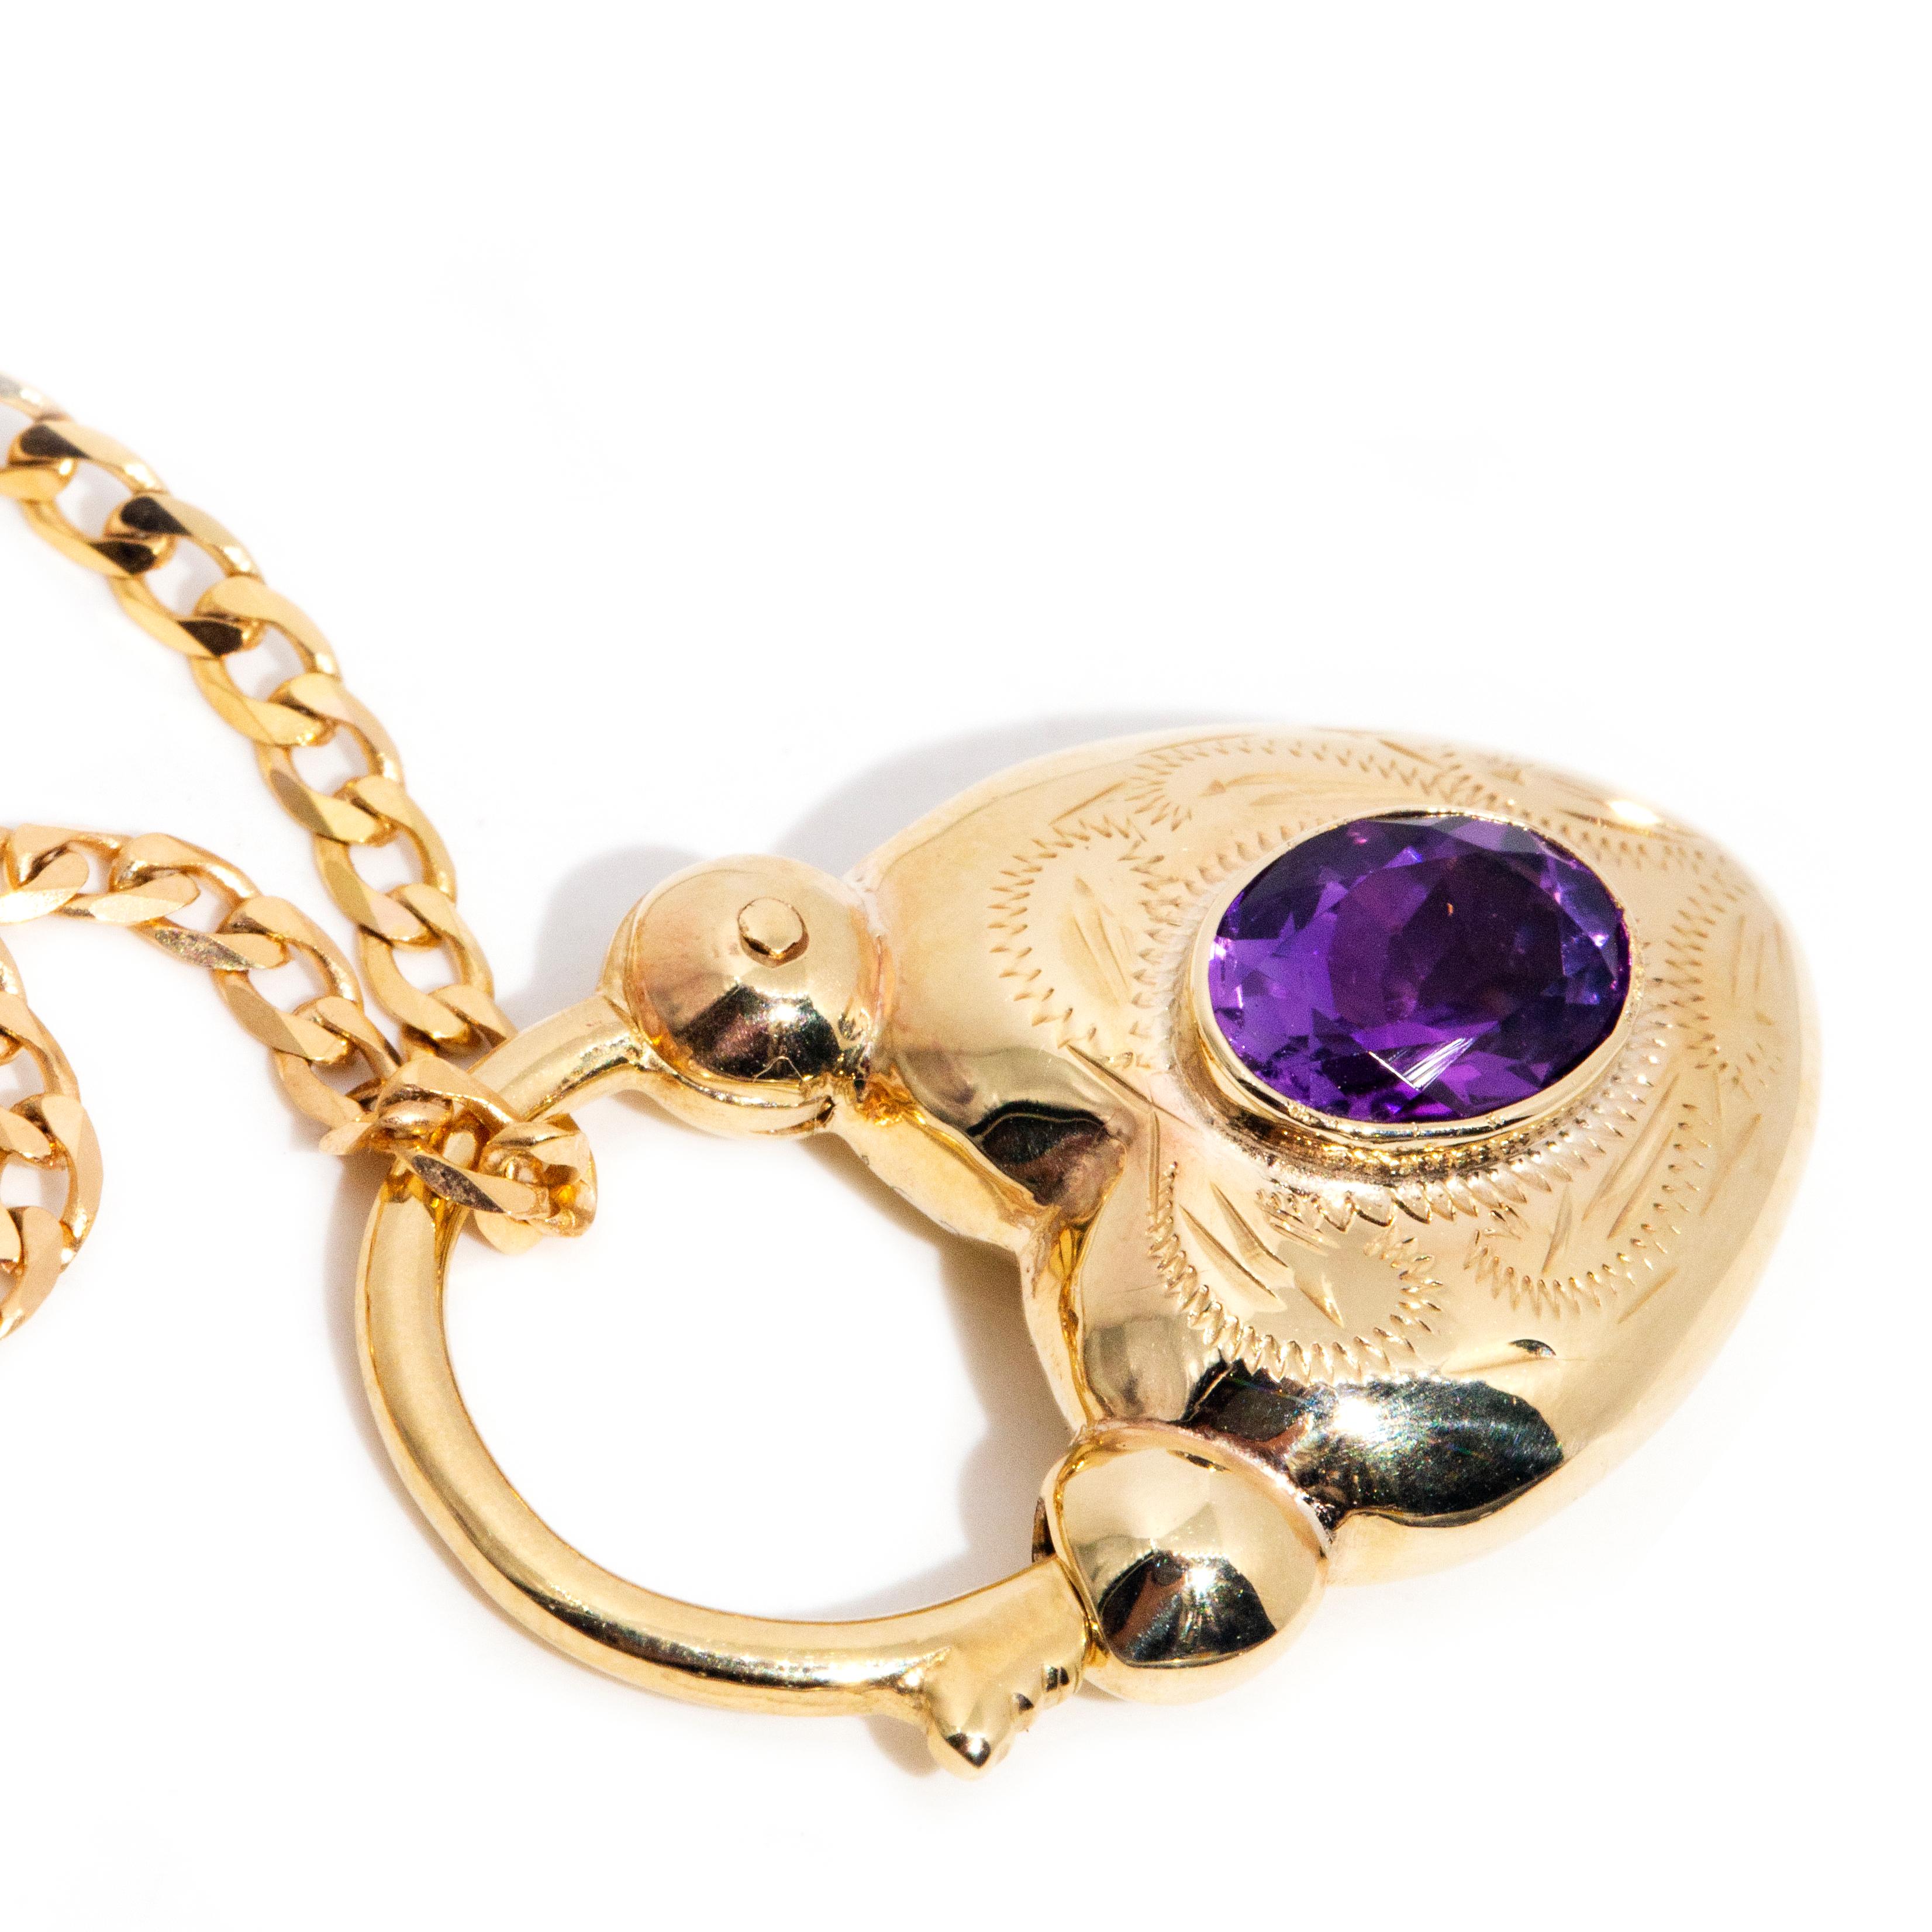 Vintage Circa 1970s Amethyst Heart Shaped Pendant & Chain 9 Carat Yellow Gold  In Good Condition For Sale In Hamilton, AU